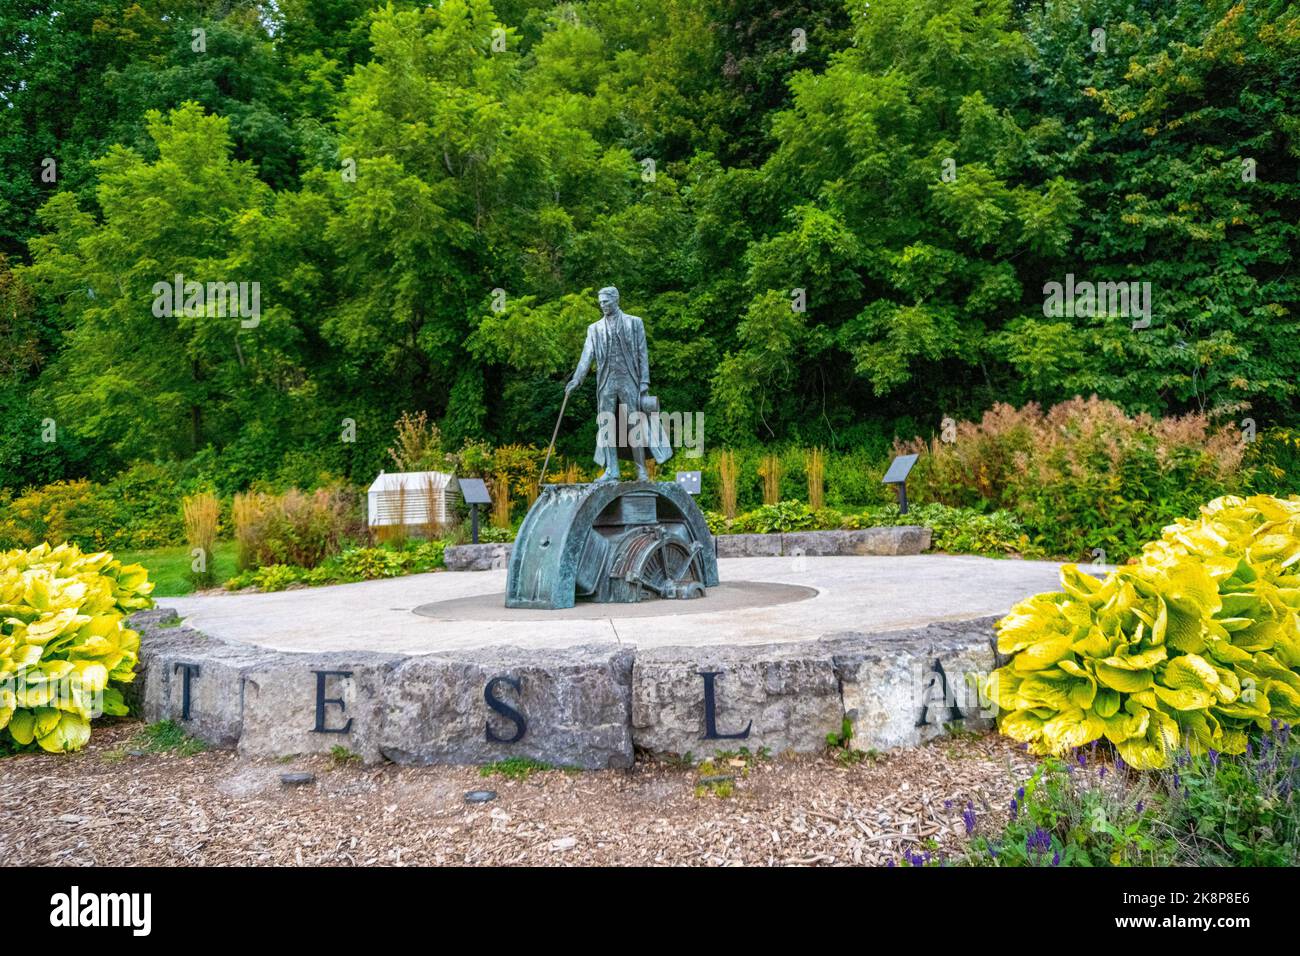 A close-up shot of the Nicola Tesla statue in the Victoria park Stock Photo